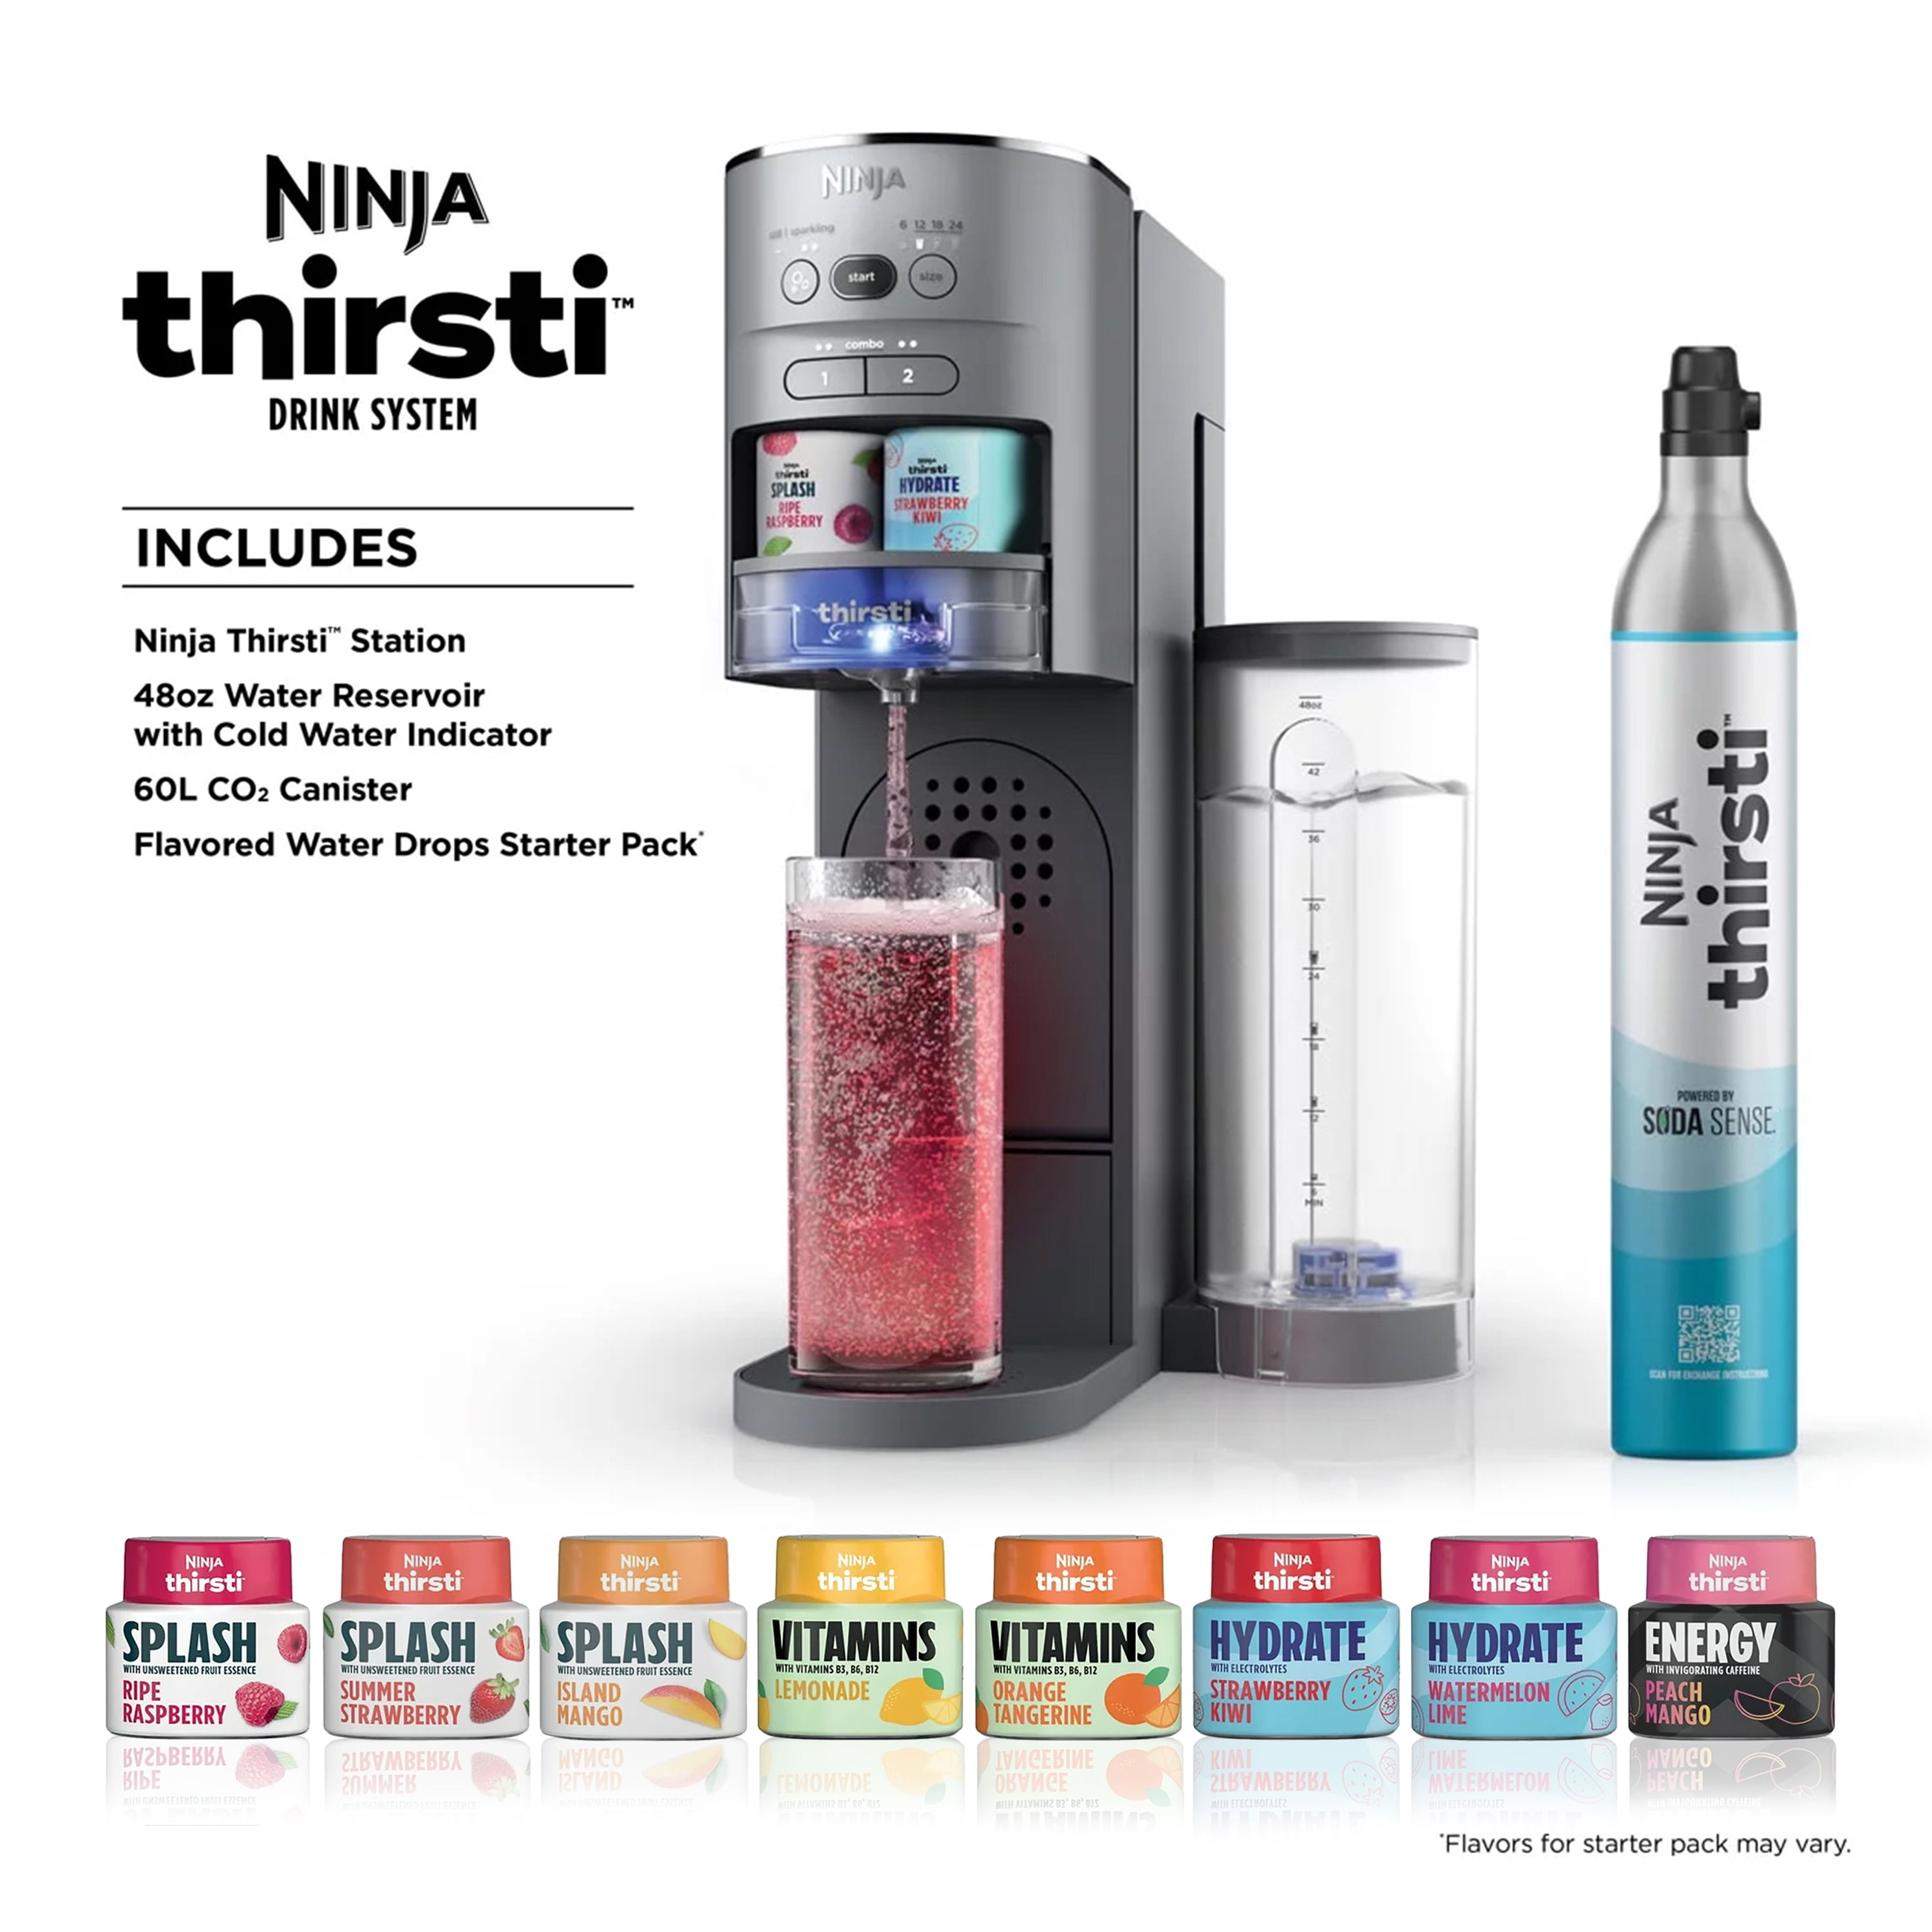 Review: Is the Ninja Thirsti Drink System Worth the $179.99 Price Tag? -  Freakin' Reviews